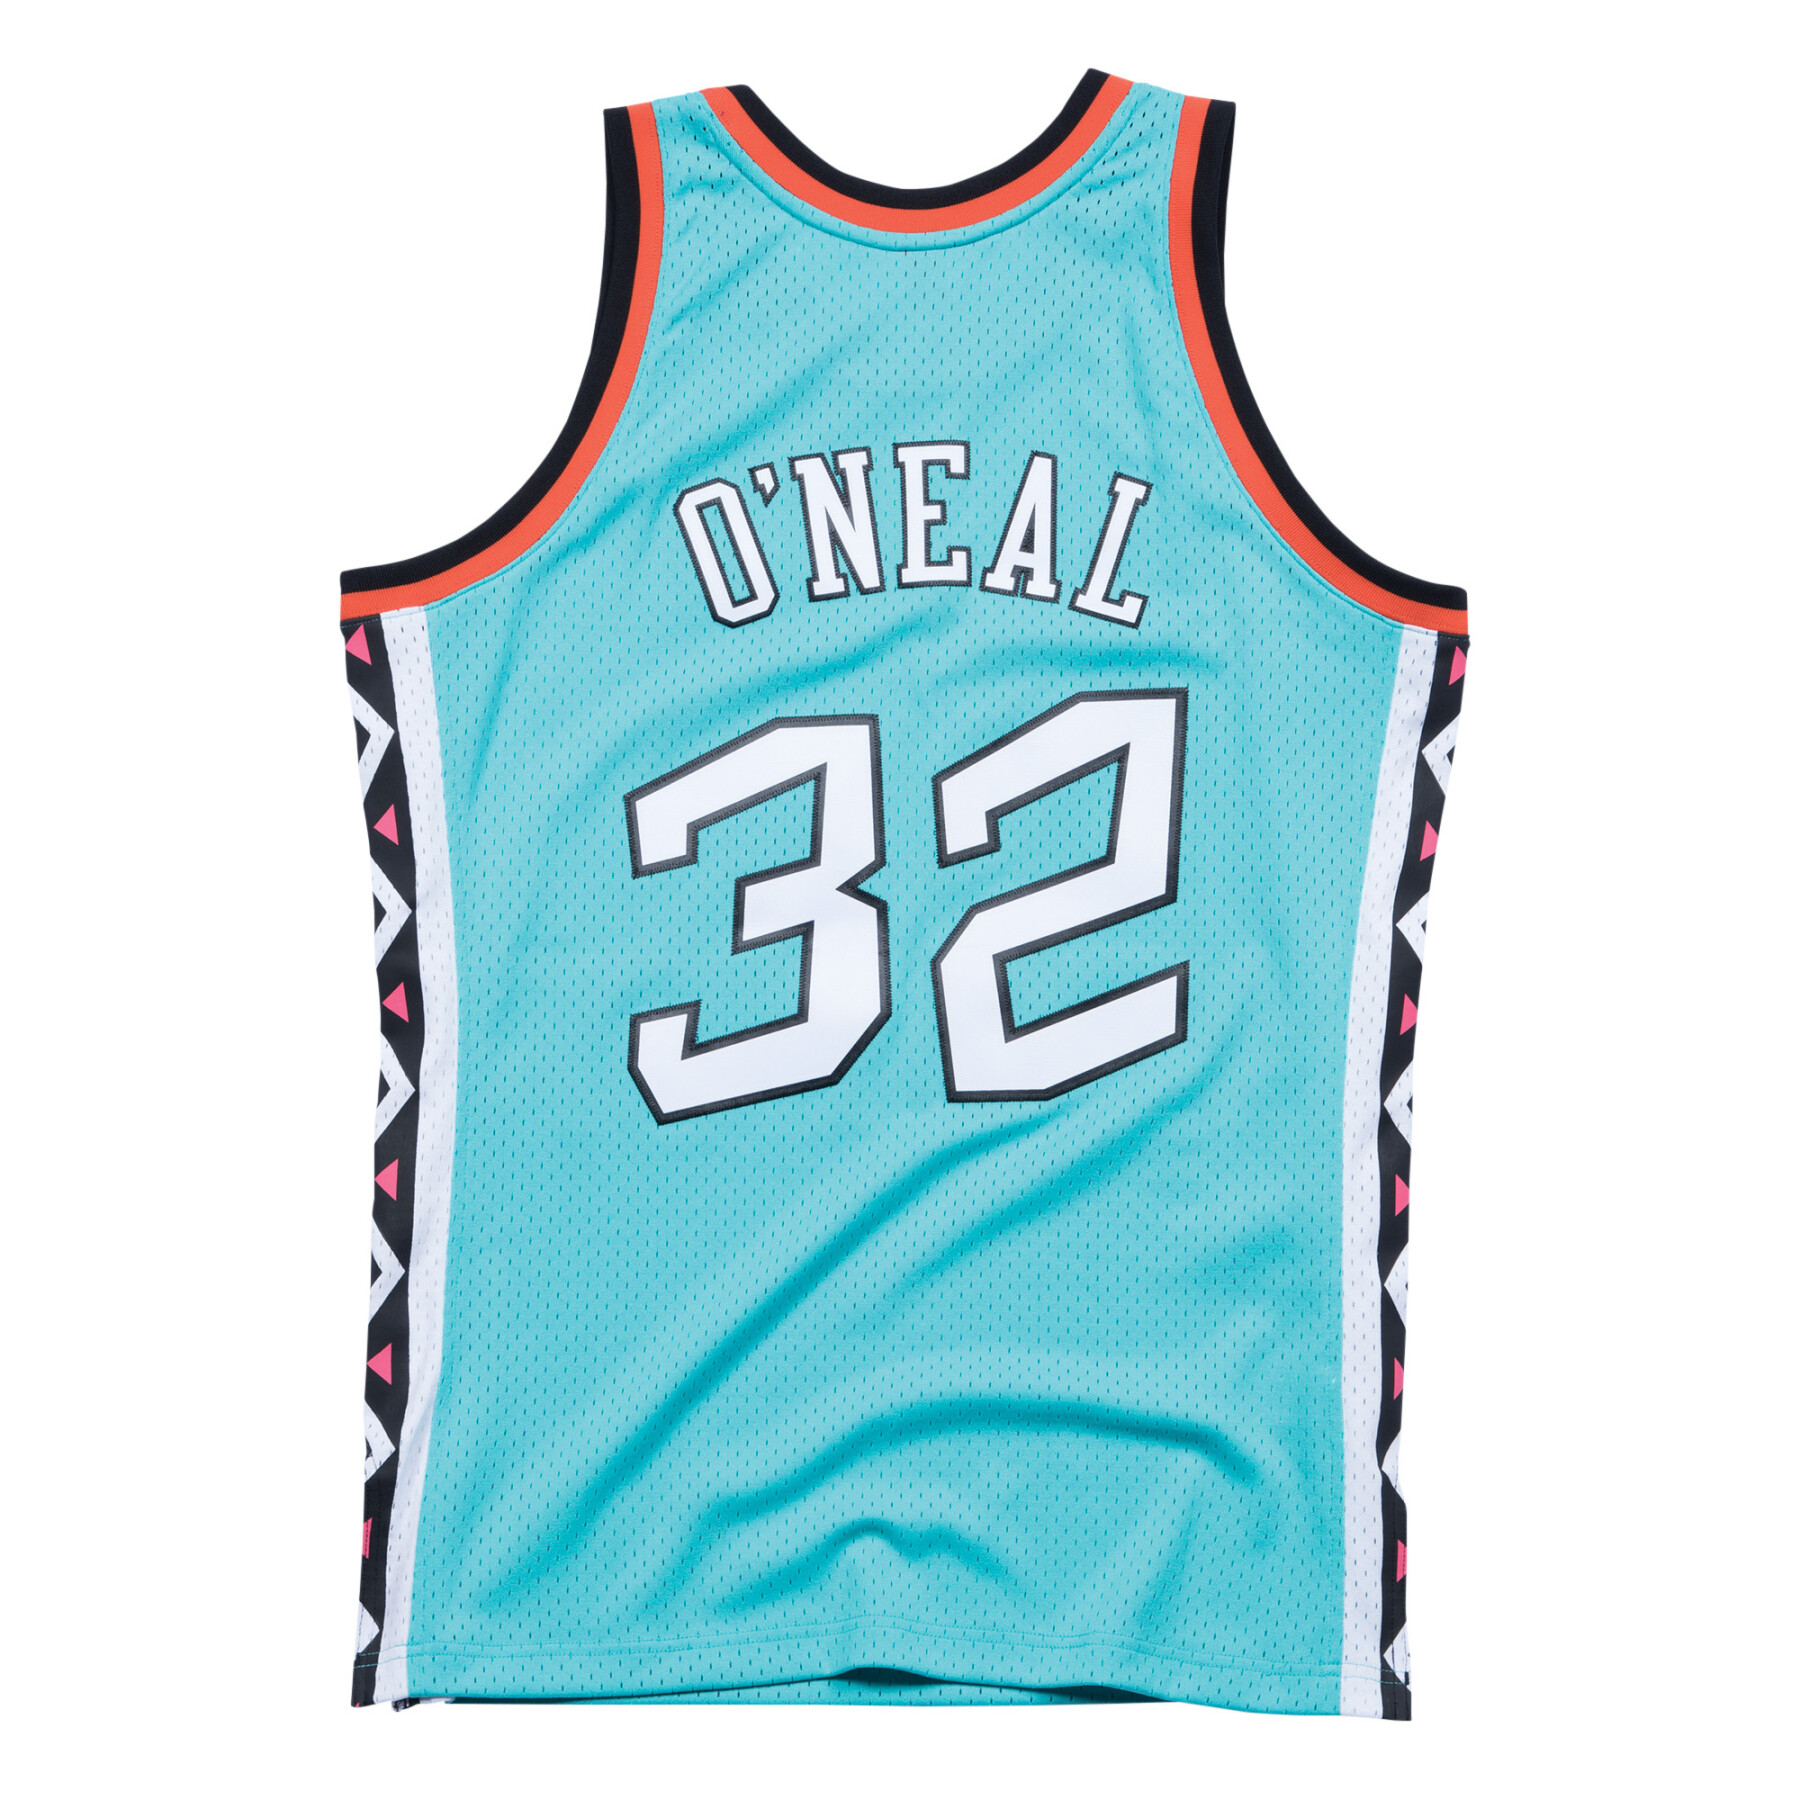 Jersey NBA All Star East 1996/97 Shaquille O'Neal